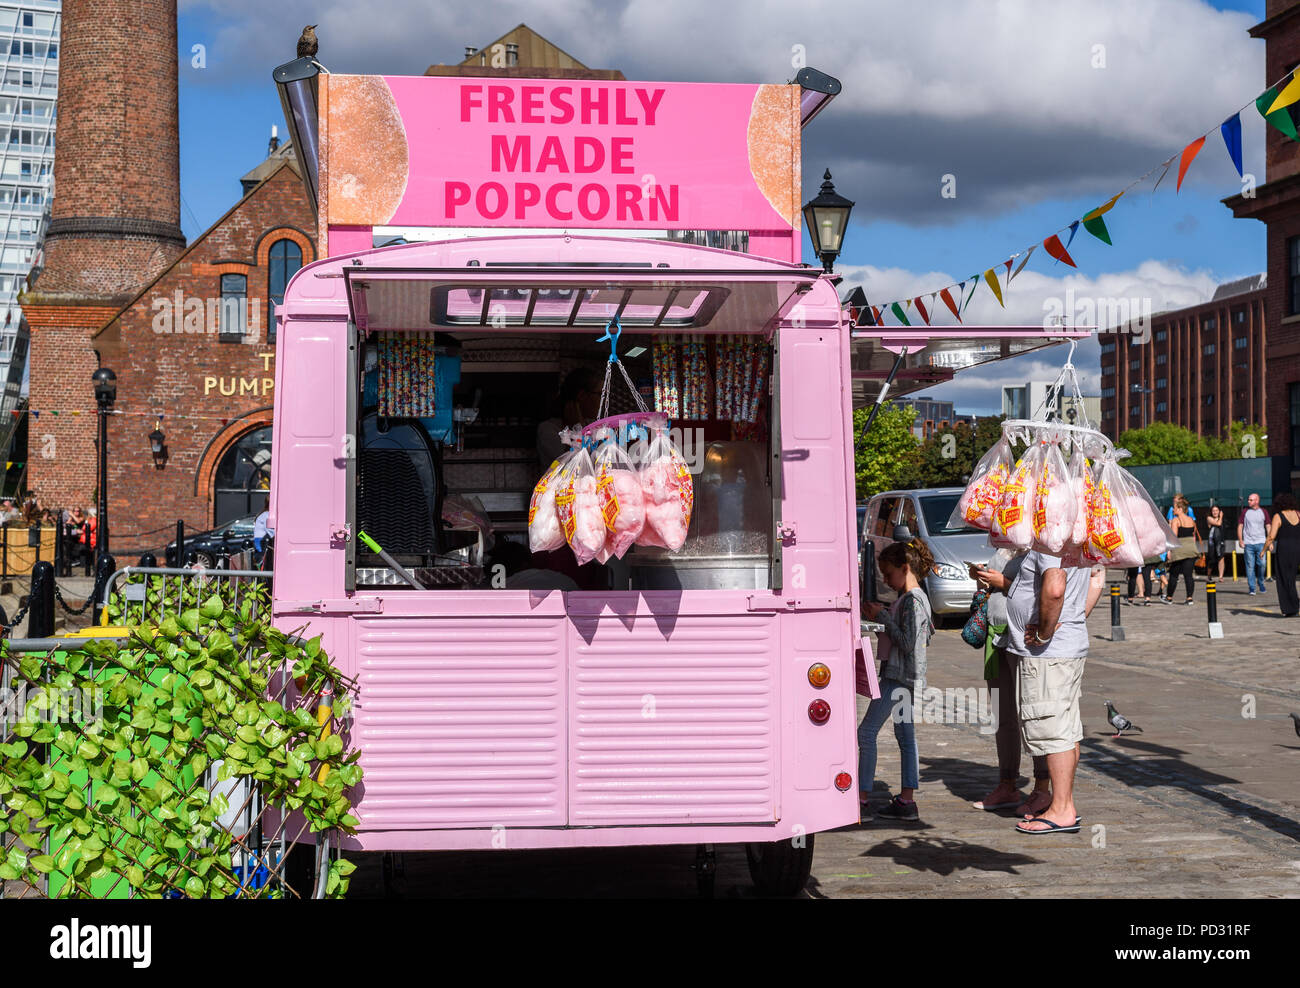 Freshly made popcorn and candy floss being sold at Albert Dock, Liverpool, England,Uk. Stock Photo